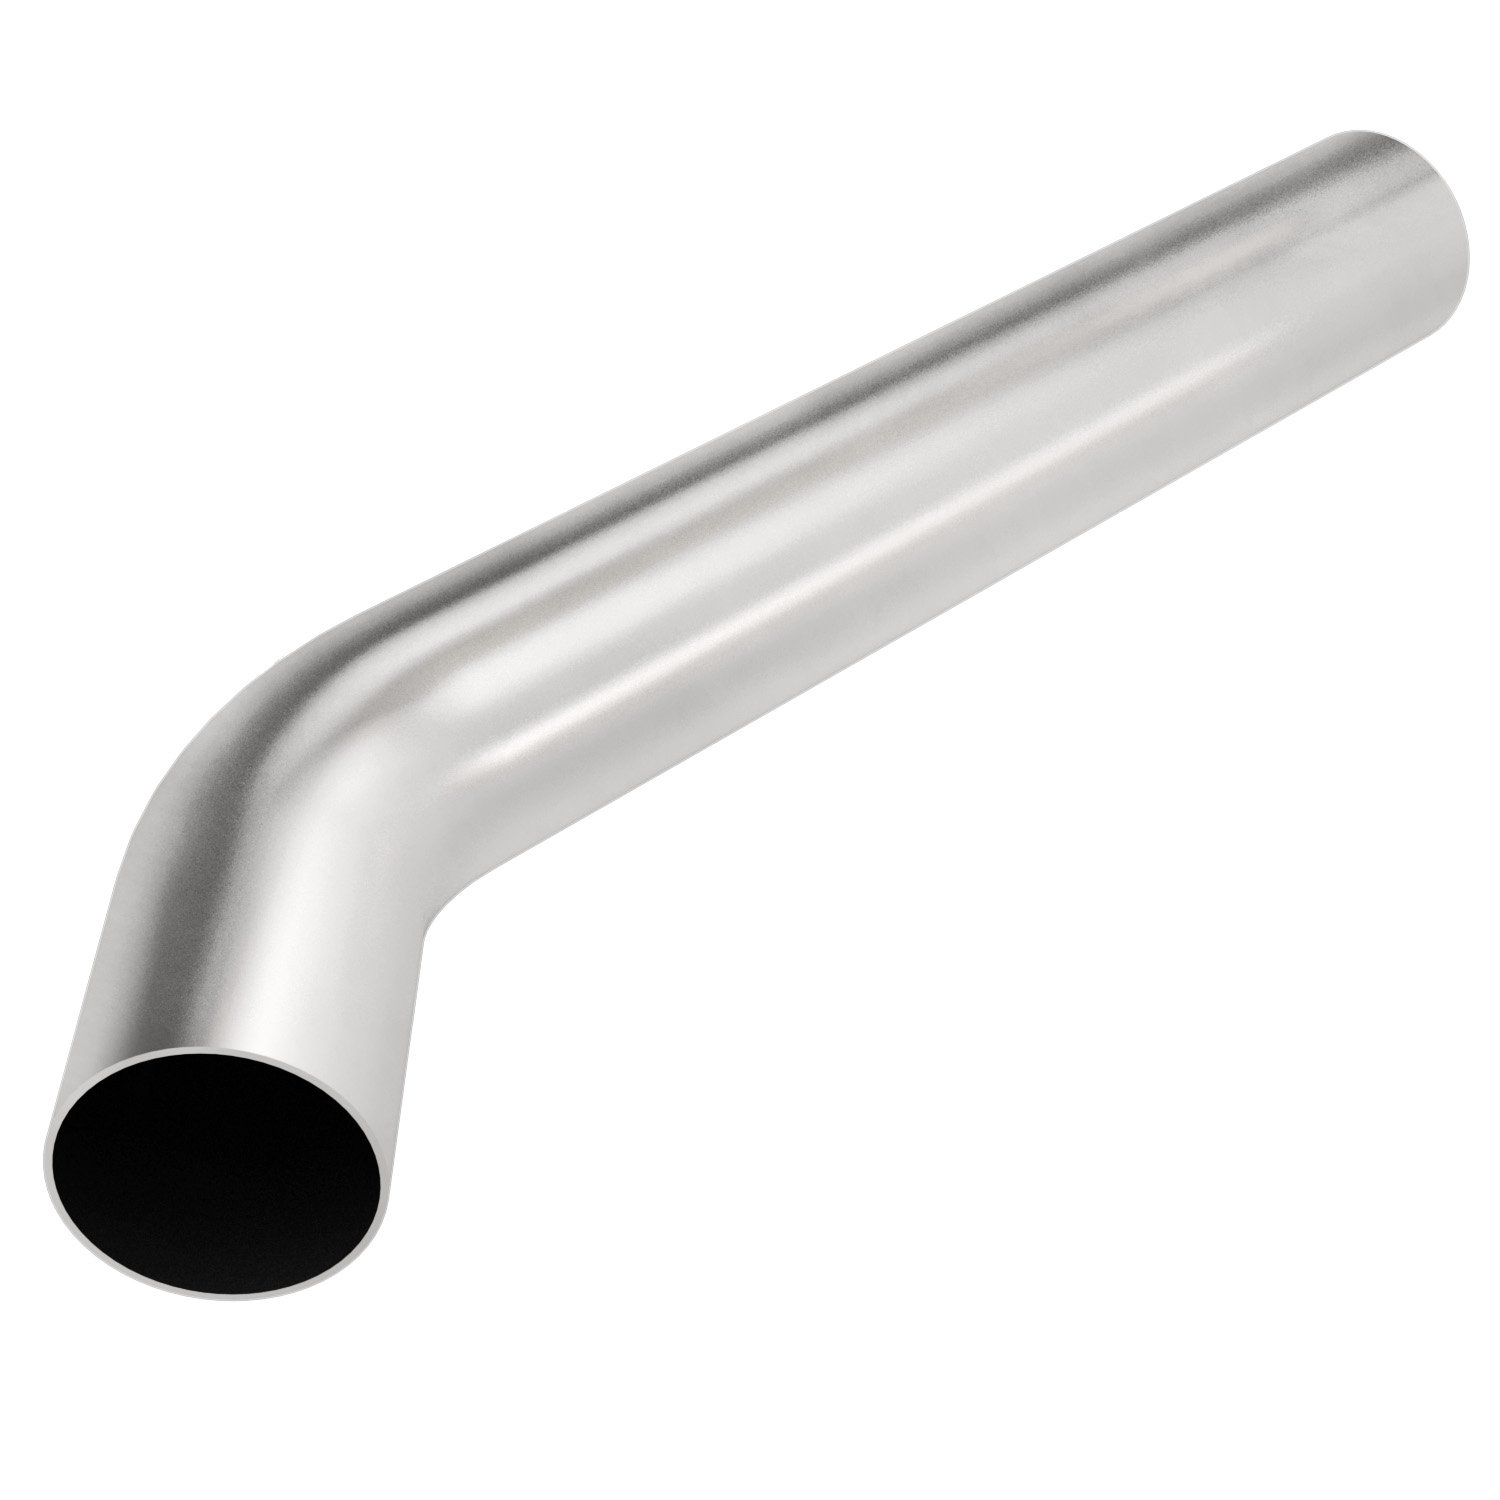 Stainless Steel 45° Transition Exhaust Pipe Outside Diameter: 2.5"